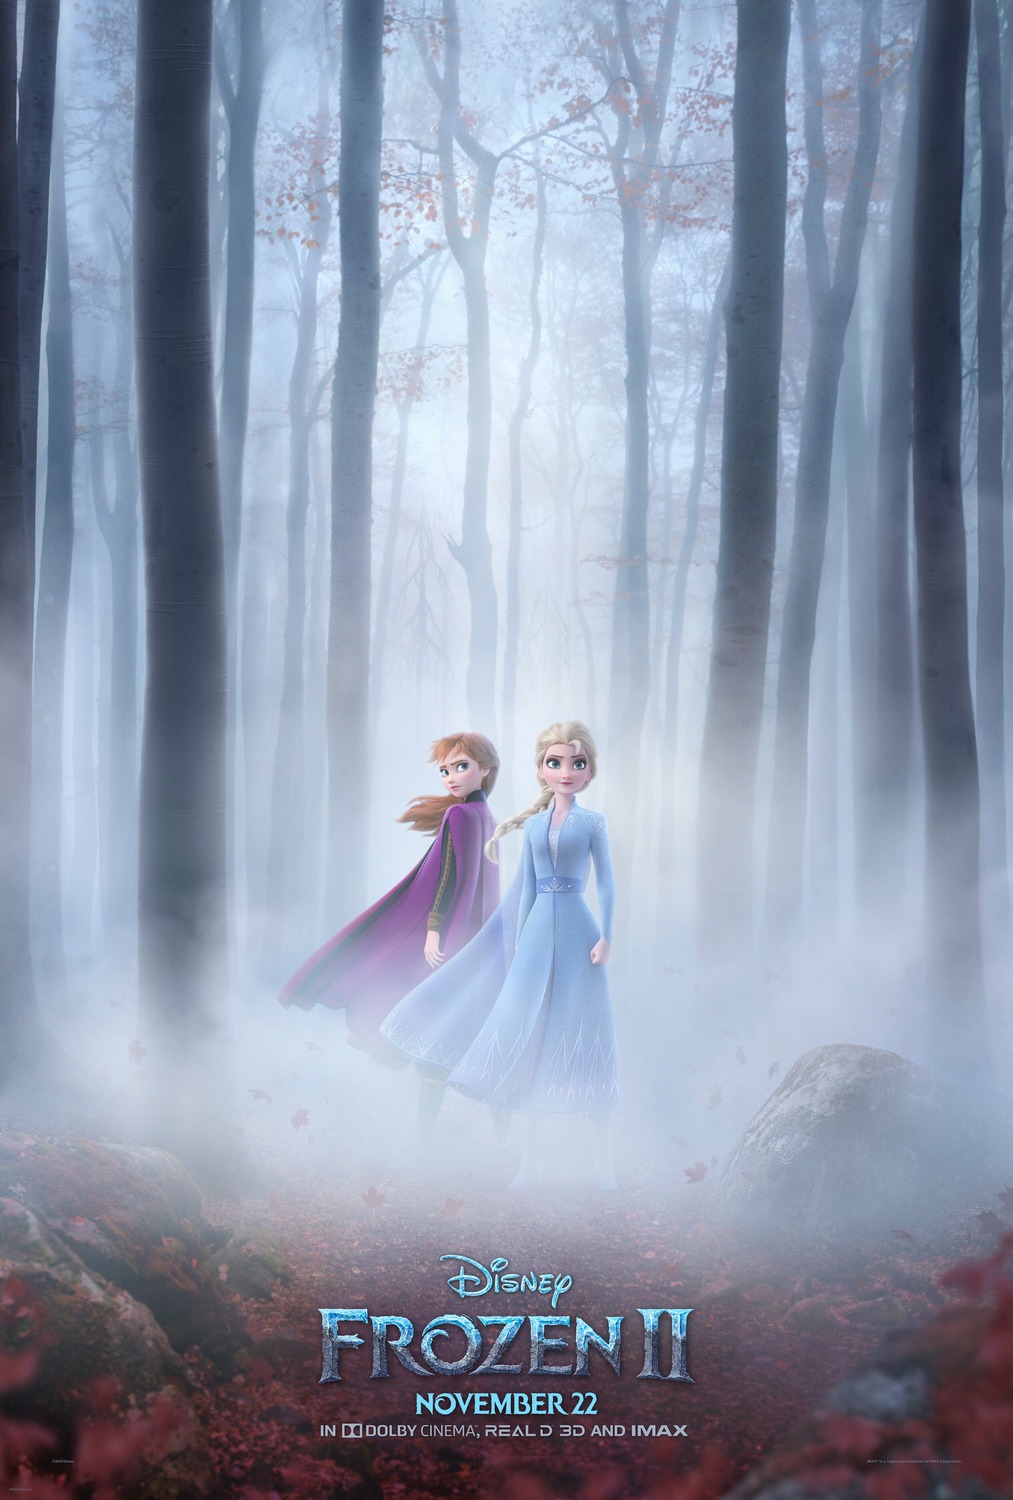 Frozen 2 film review: another happily ever after?